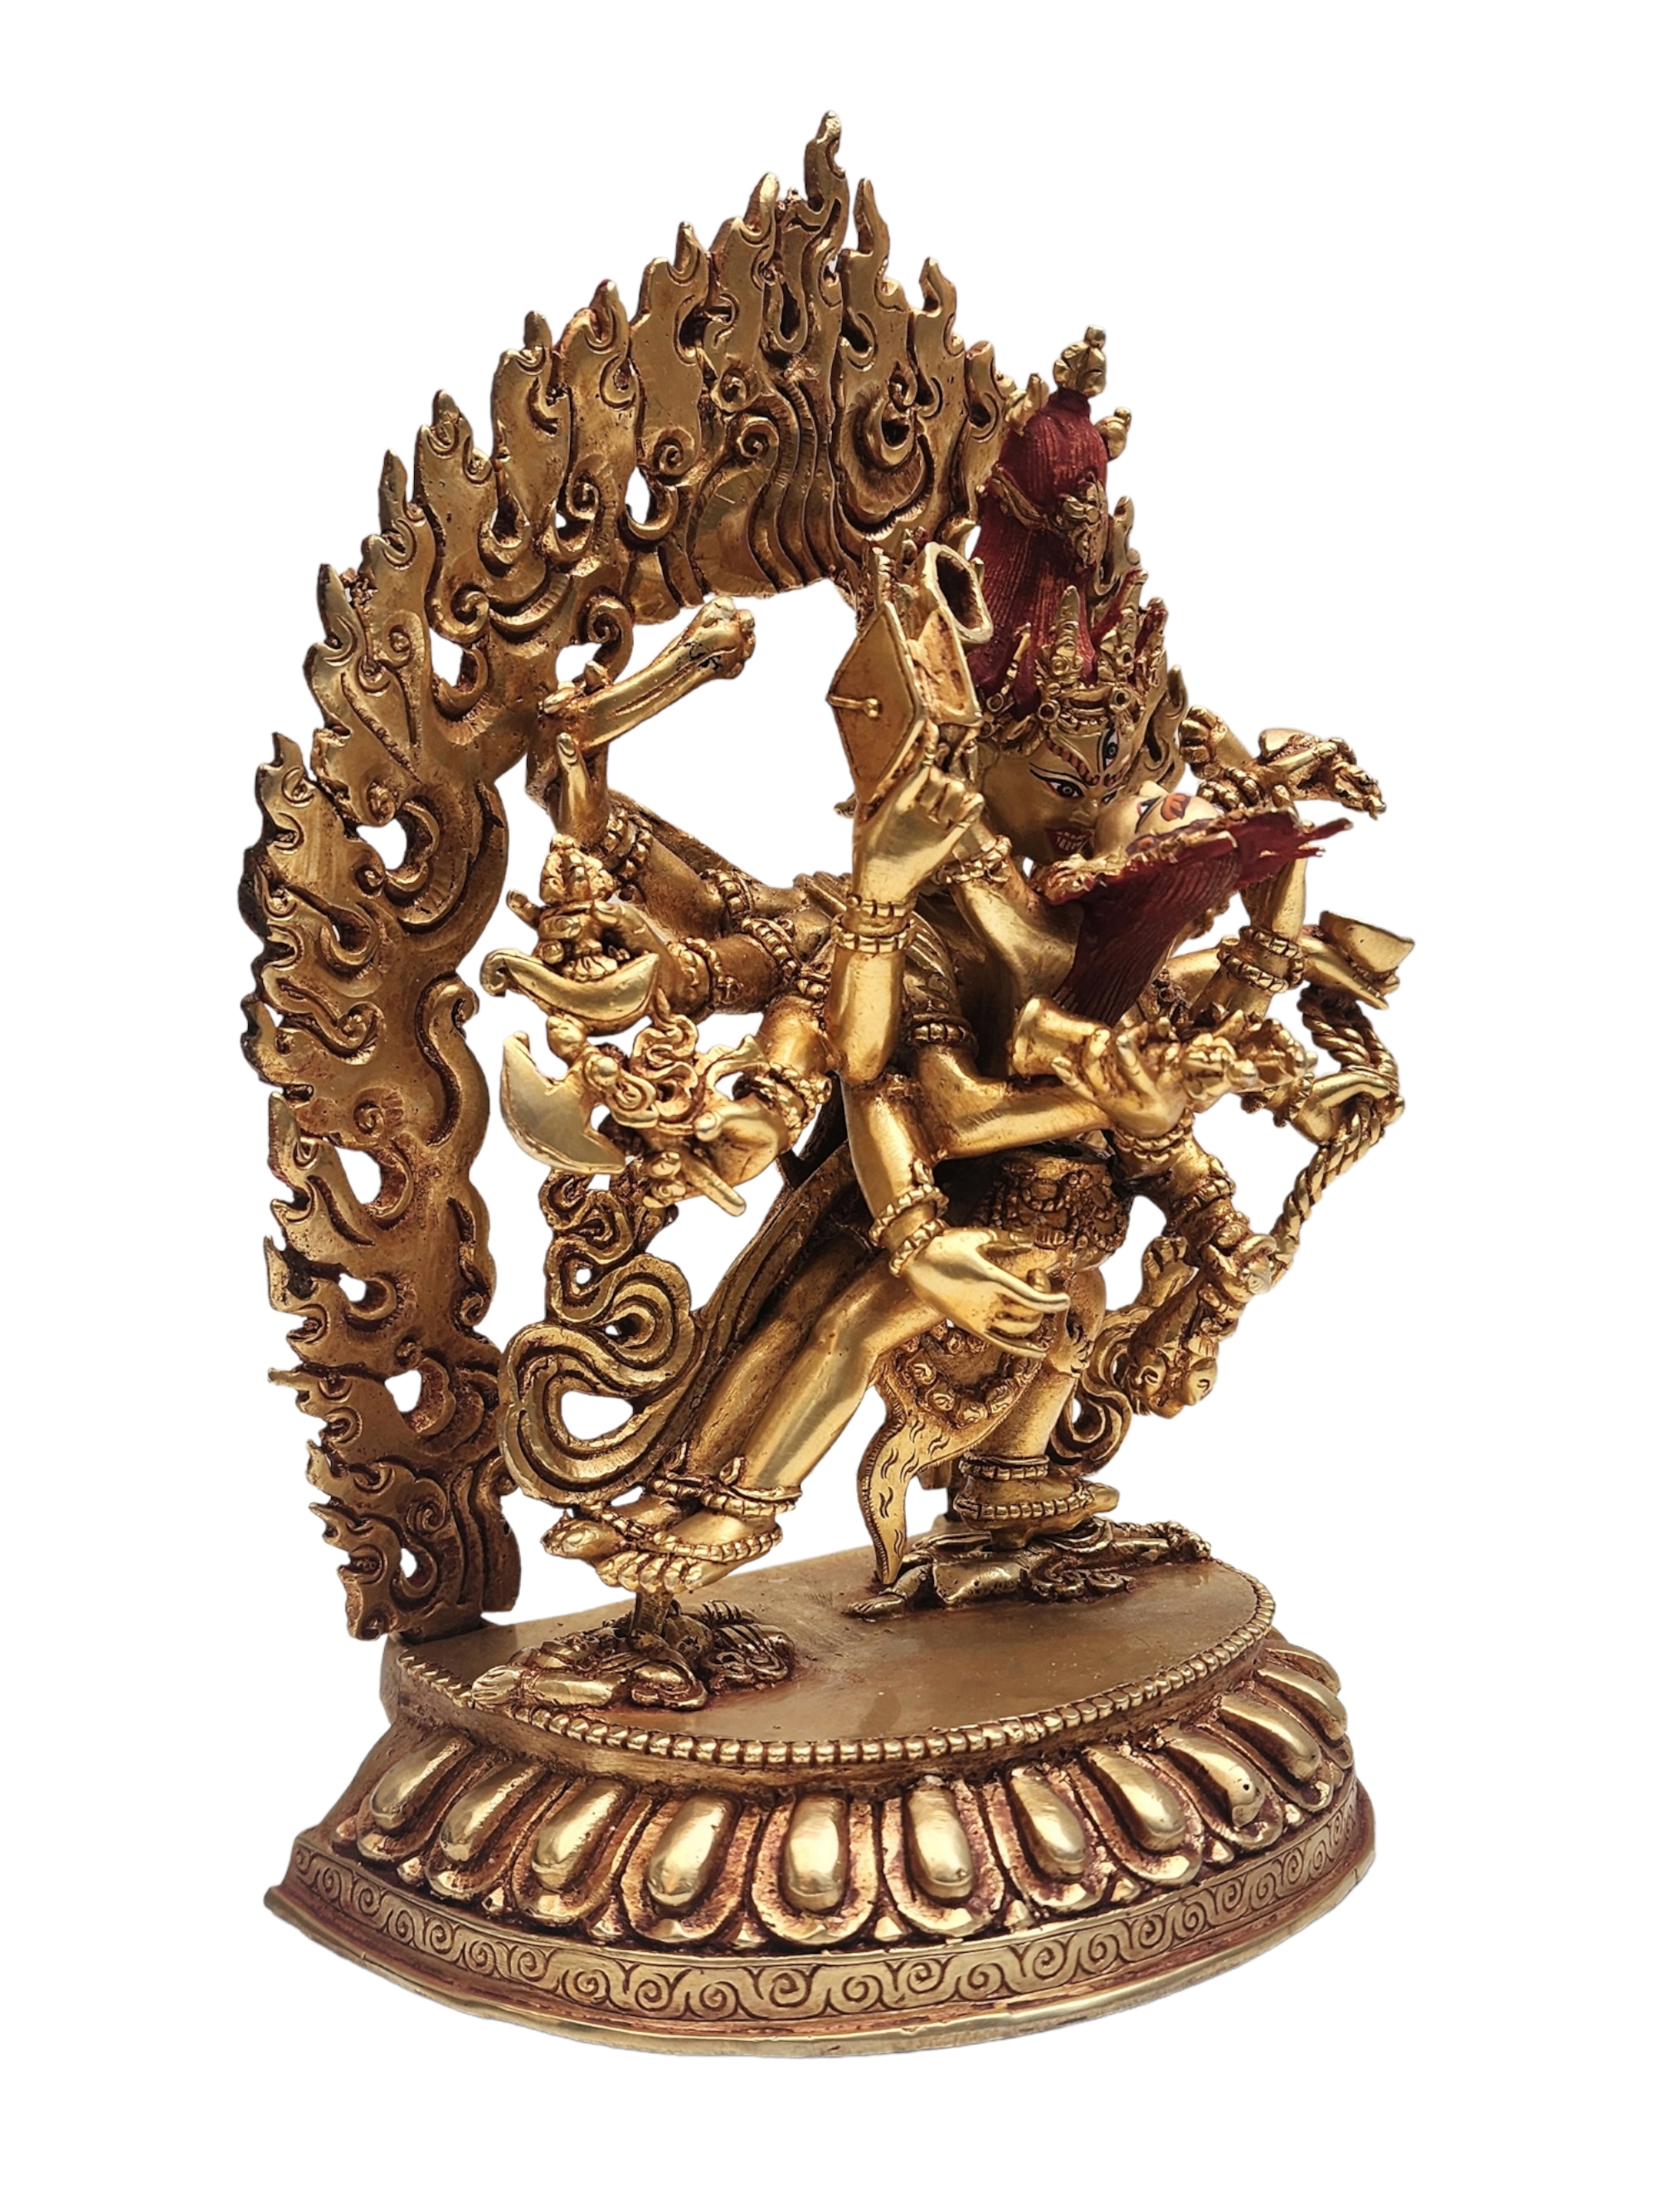 Buddhist Statue Of chakrasamvara, With Full Gold Plated And Painted Face